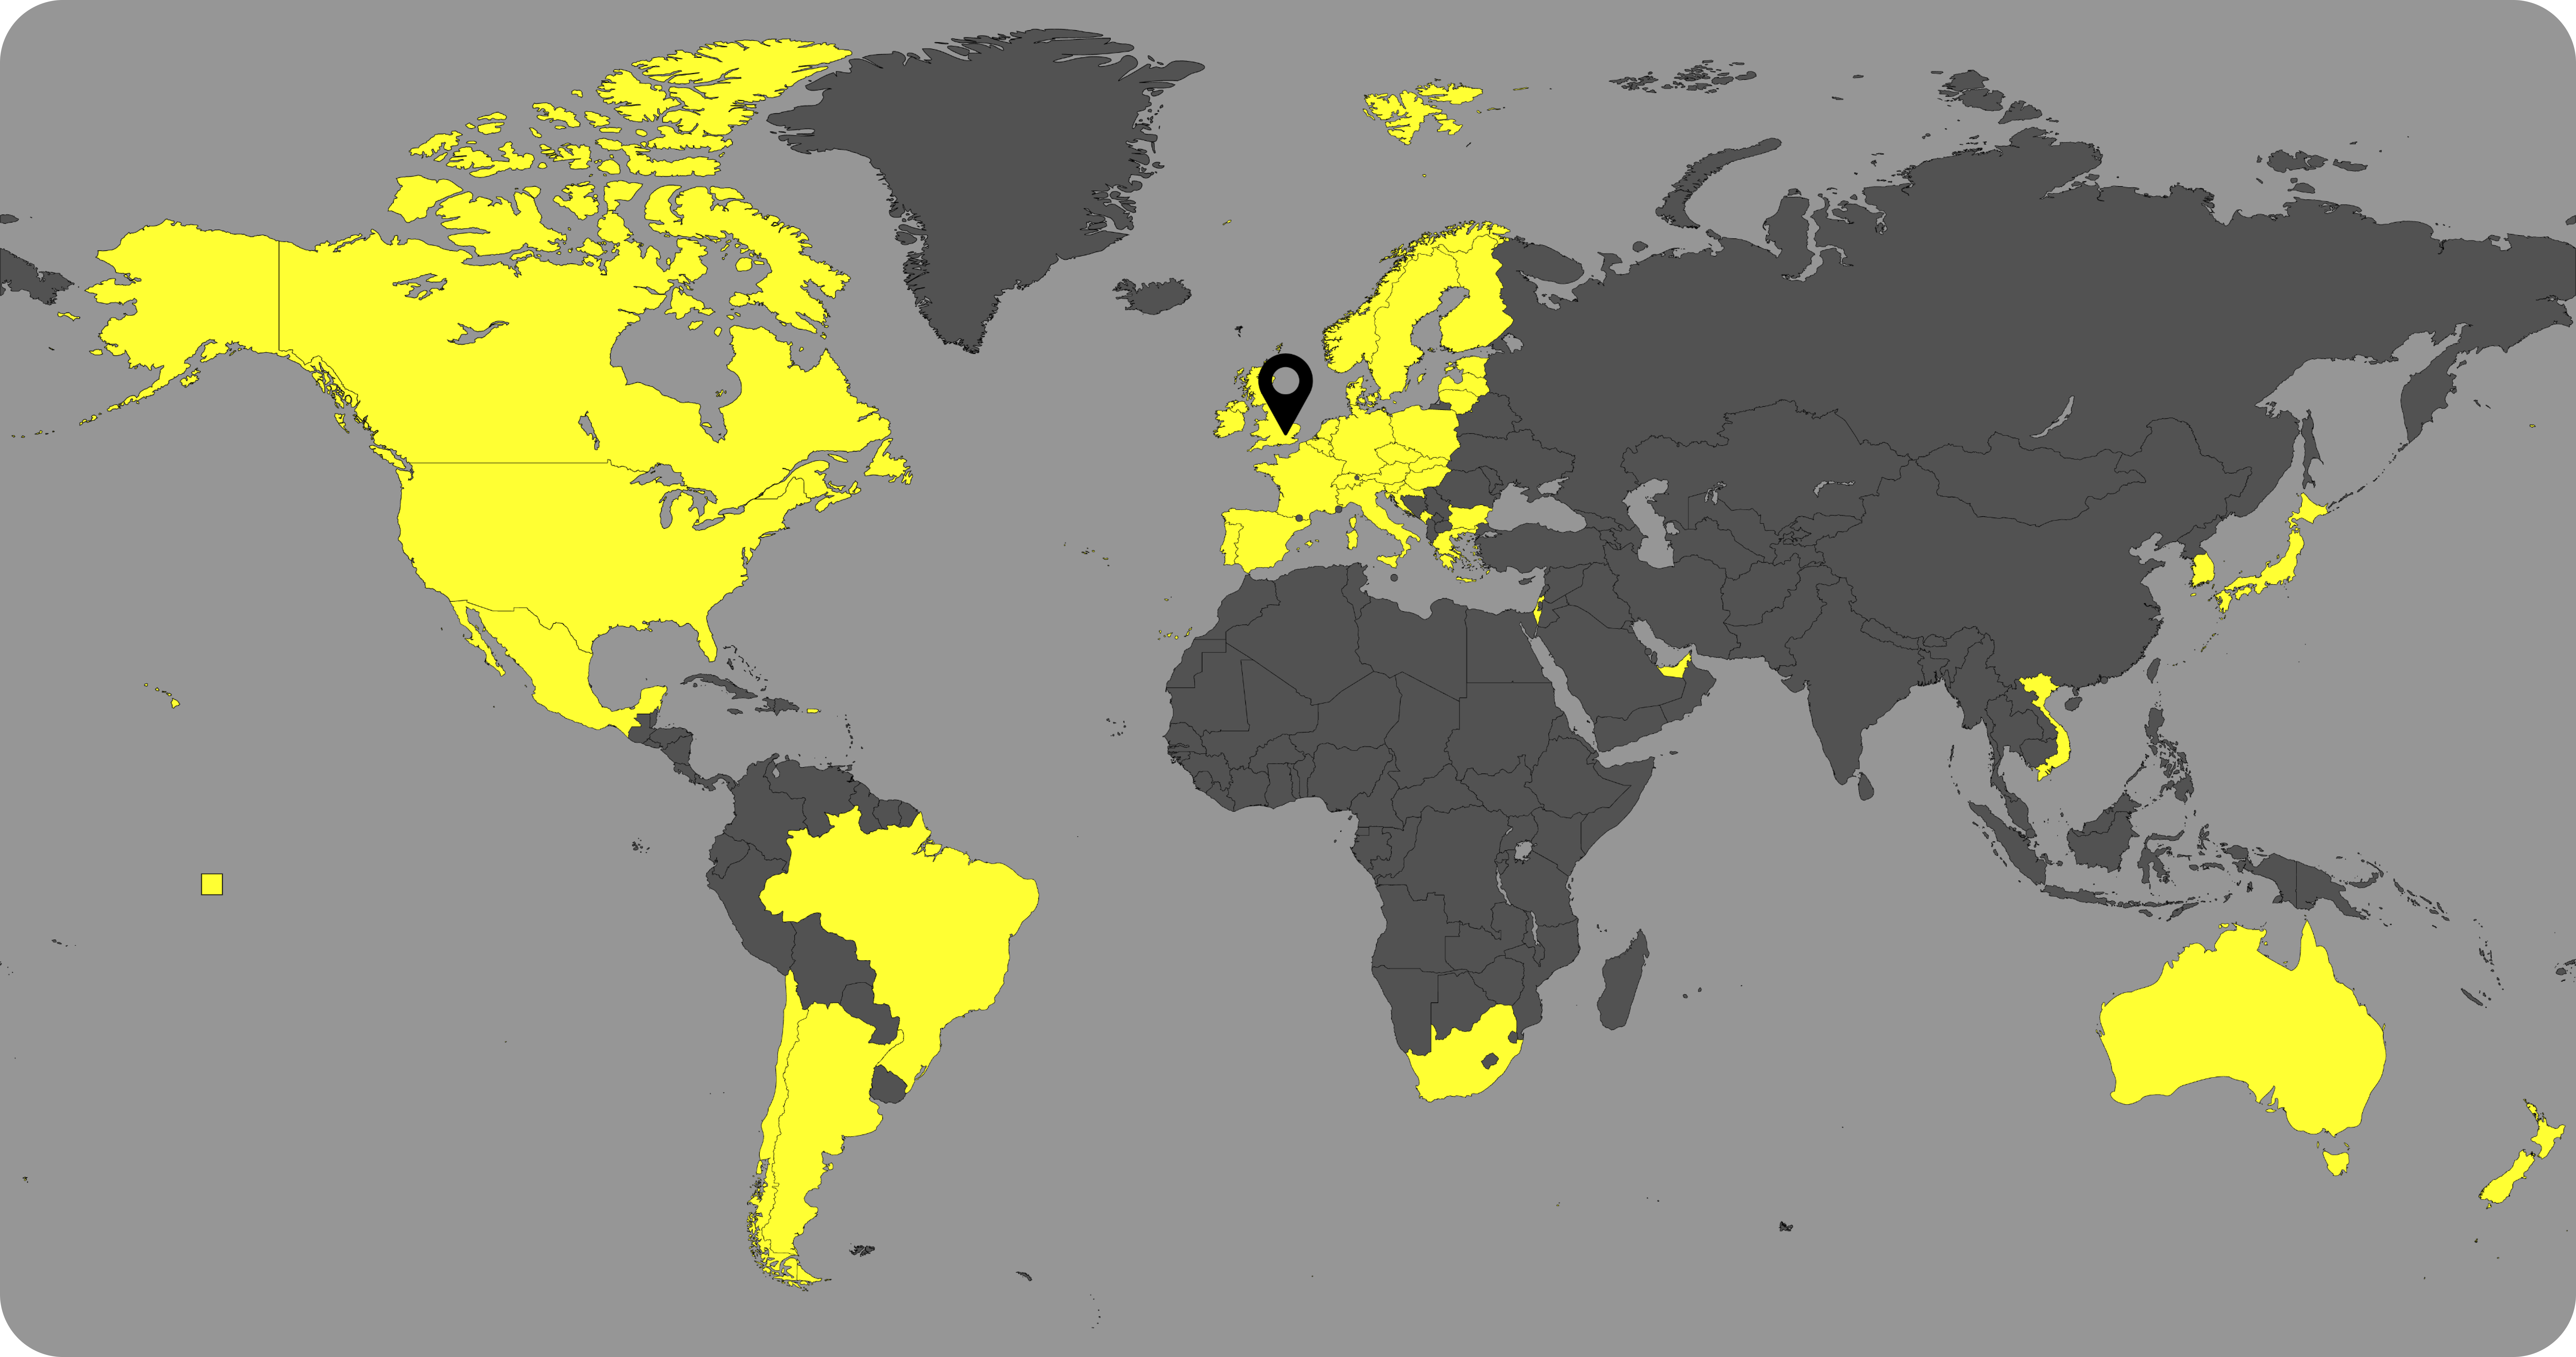 world map with timvero clients' locations